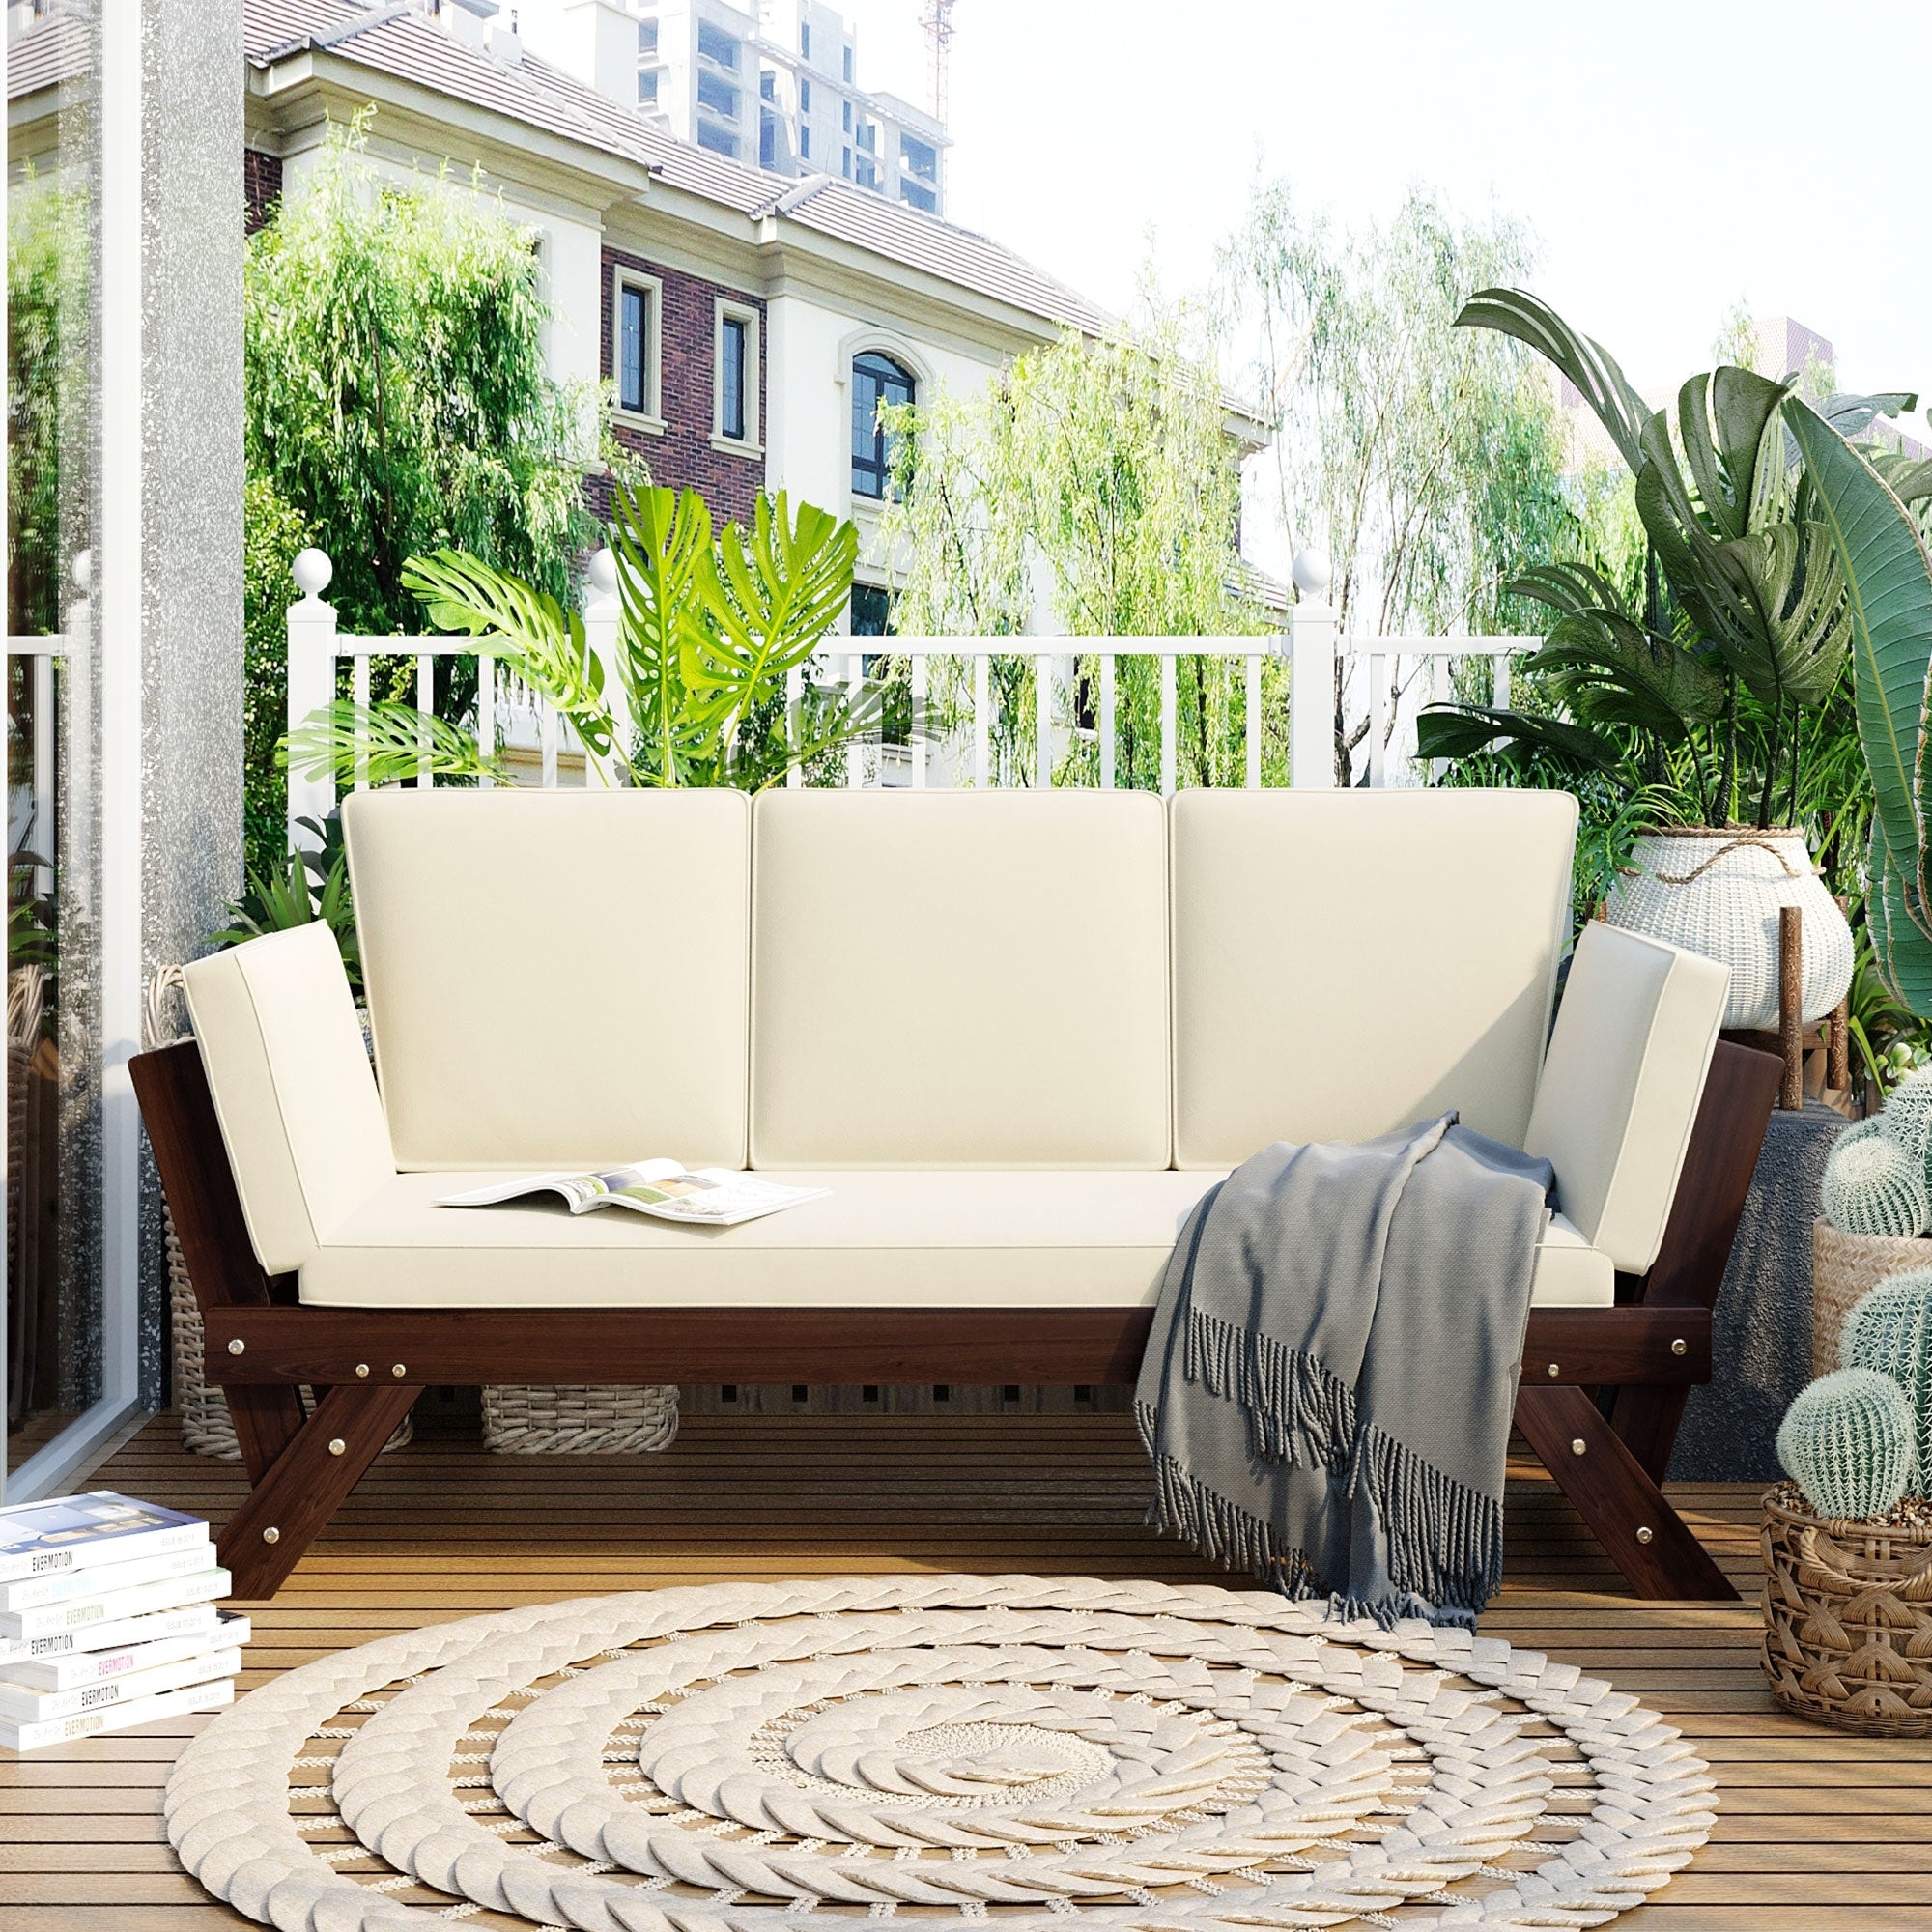 Outdoor Adjustable Wooden Patio Daybed Sofa Chaise Lounge With Cushions